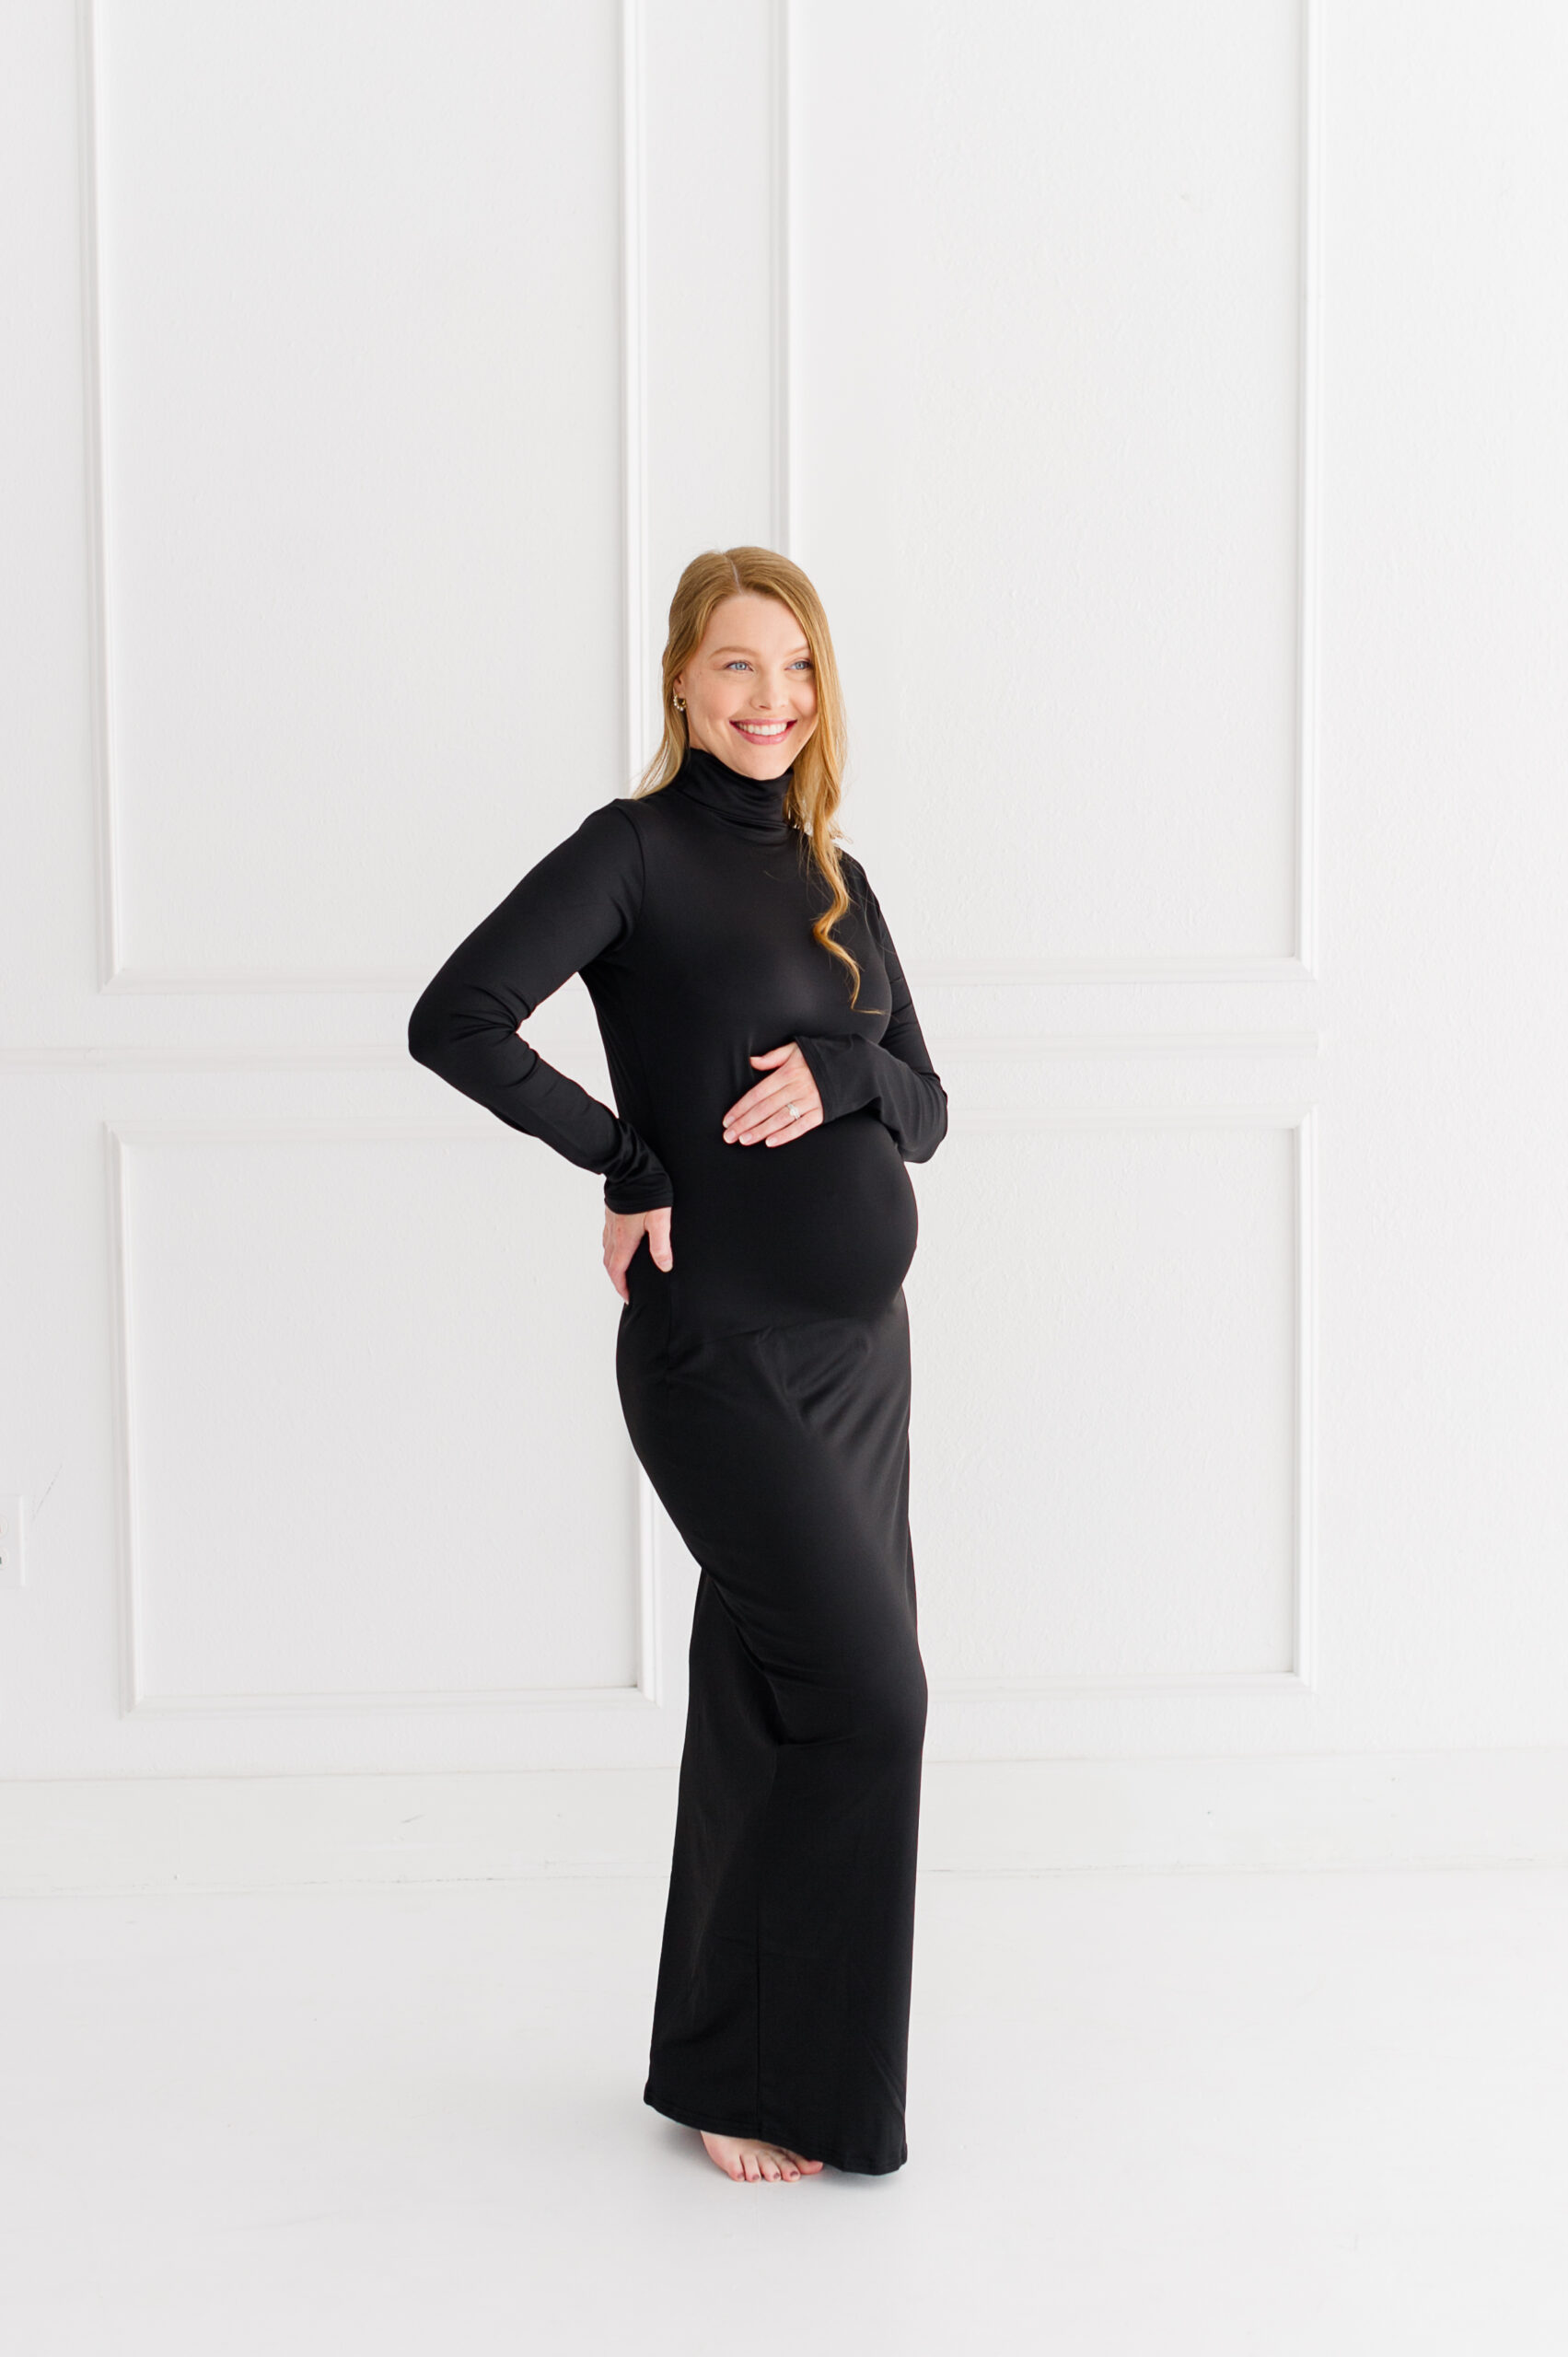 Beautiful glowing mother takes studio maternity photos wearing all black to celebrate 20 weeks pregnant in a natural light studio in Orlando, Florida.